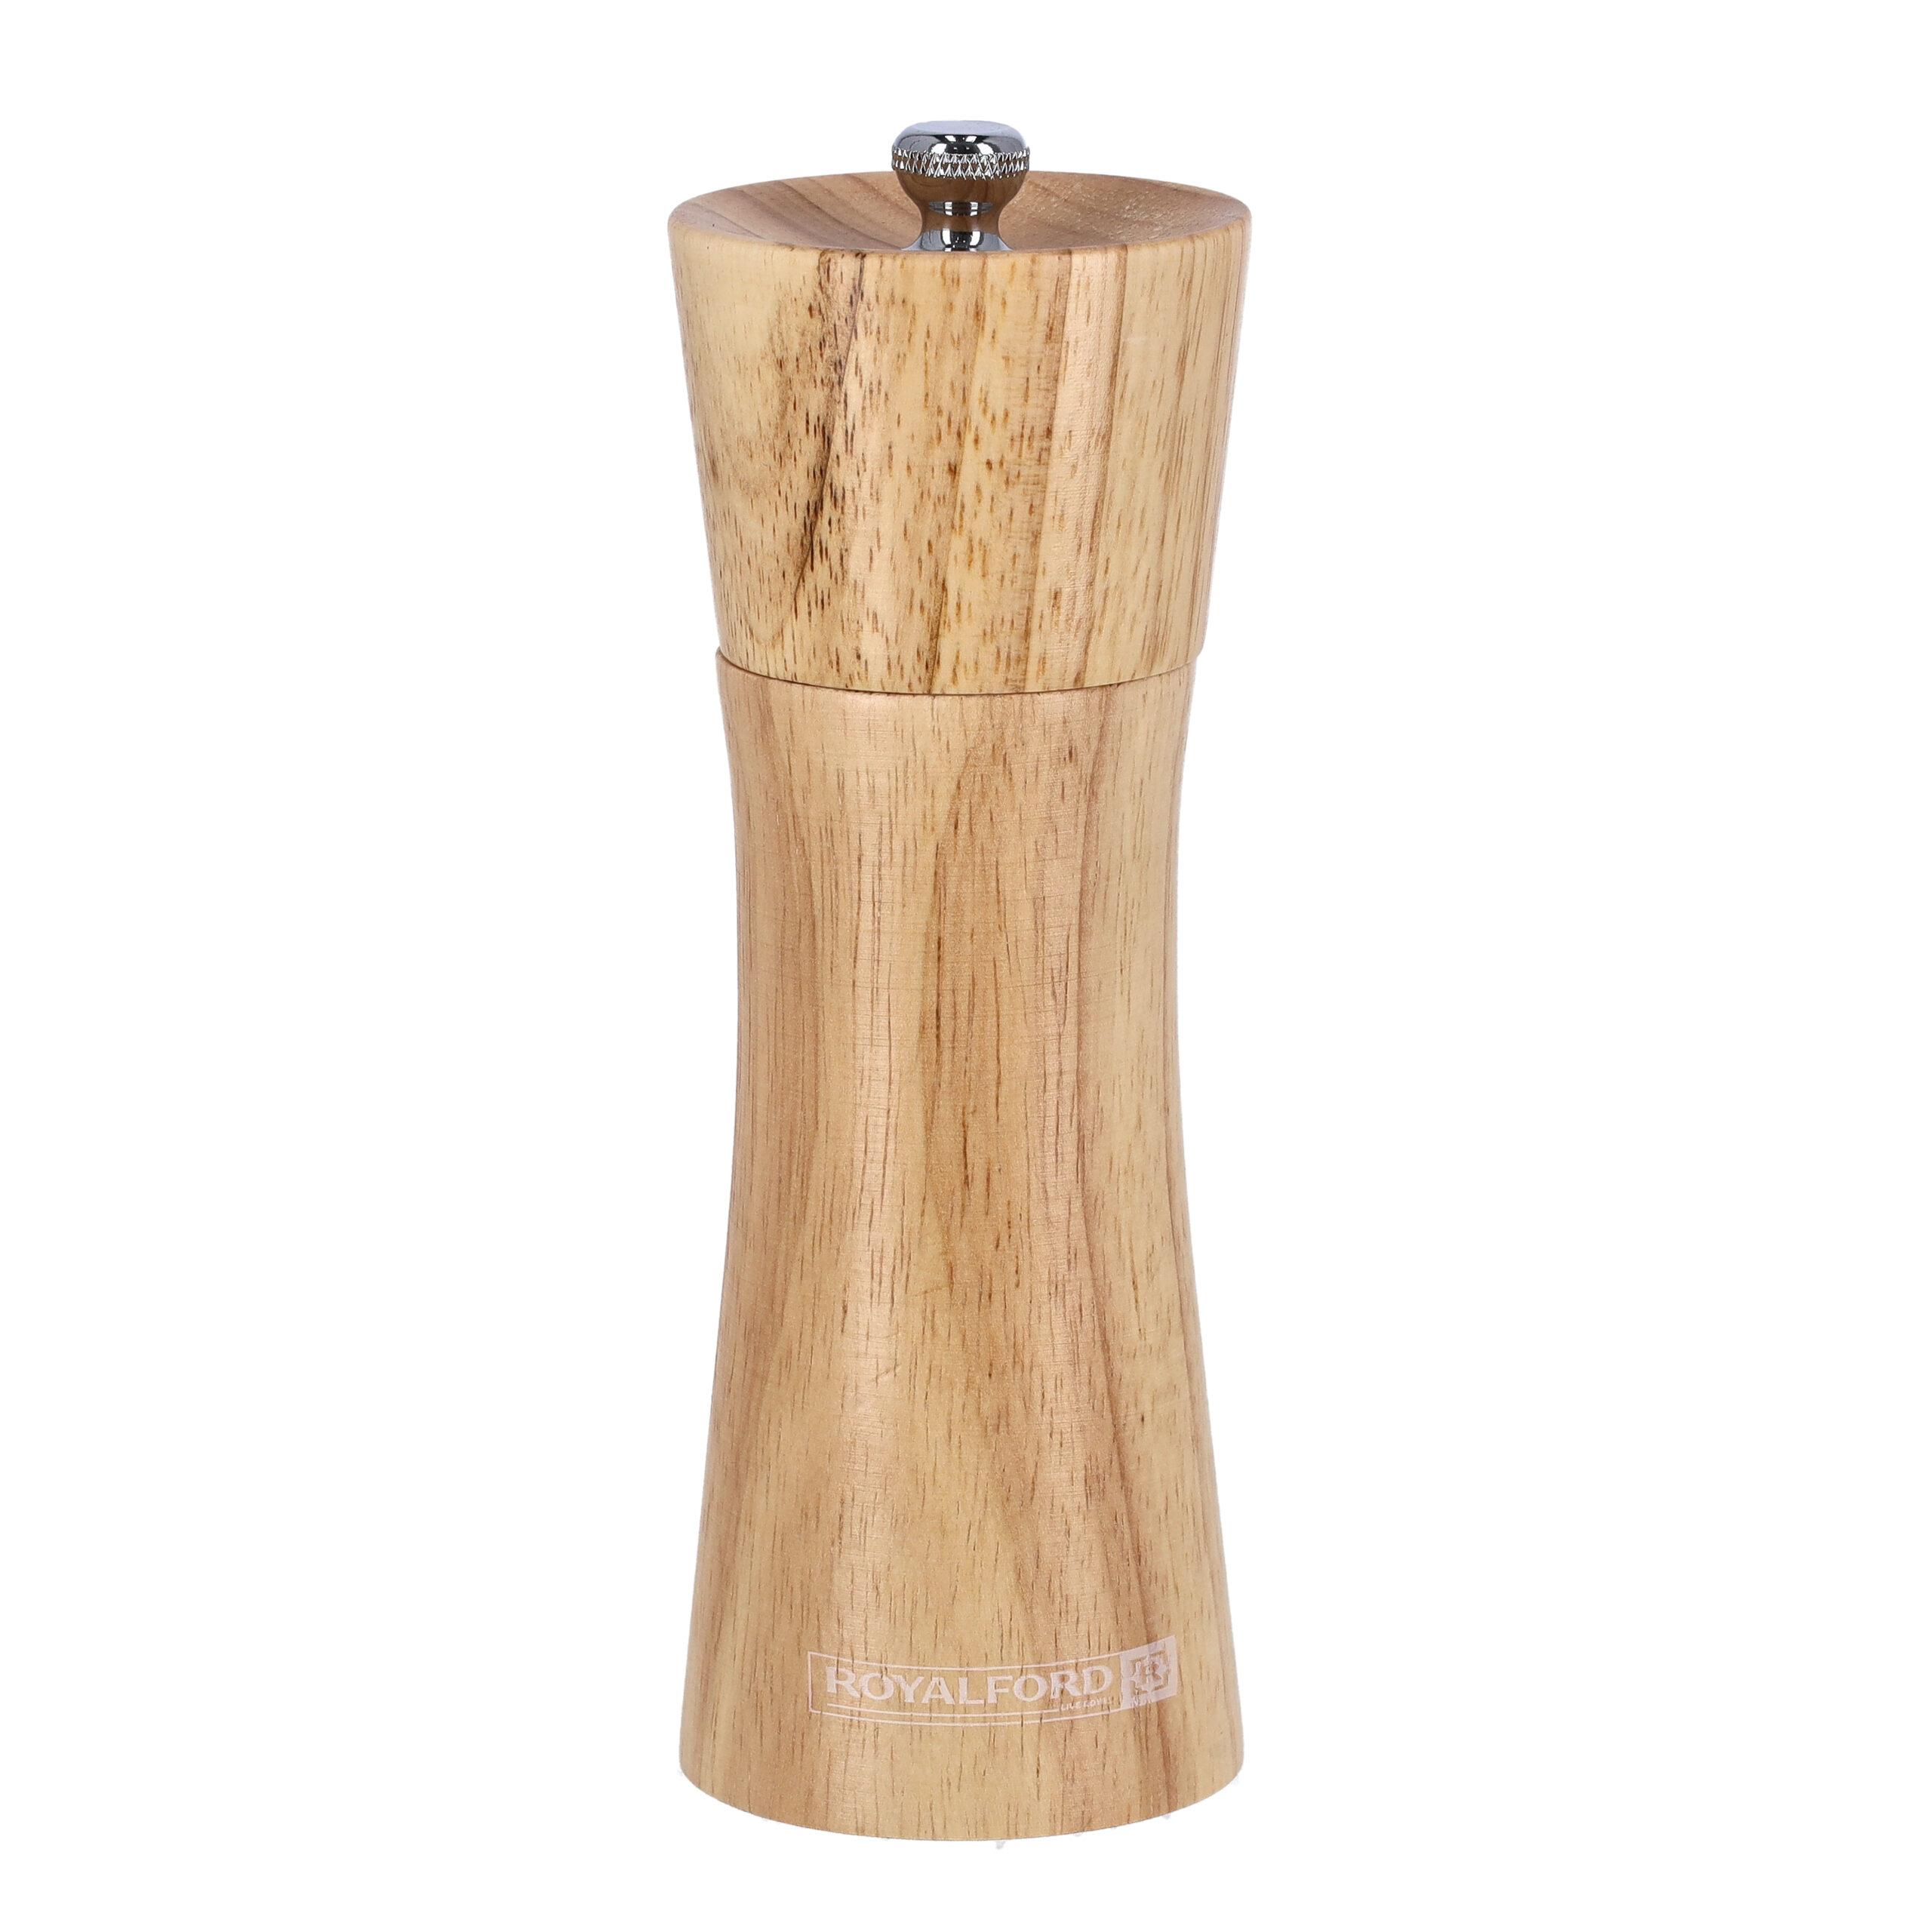 Royalford Wooden Pepper Mill With Grinder 6"